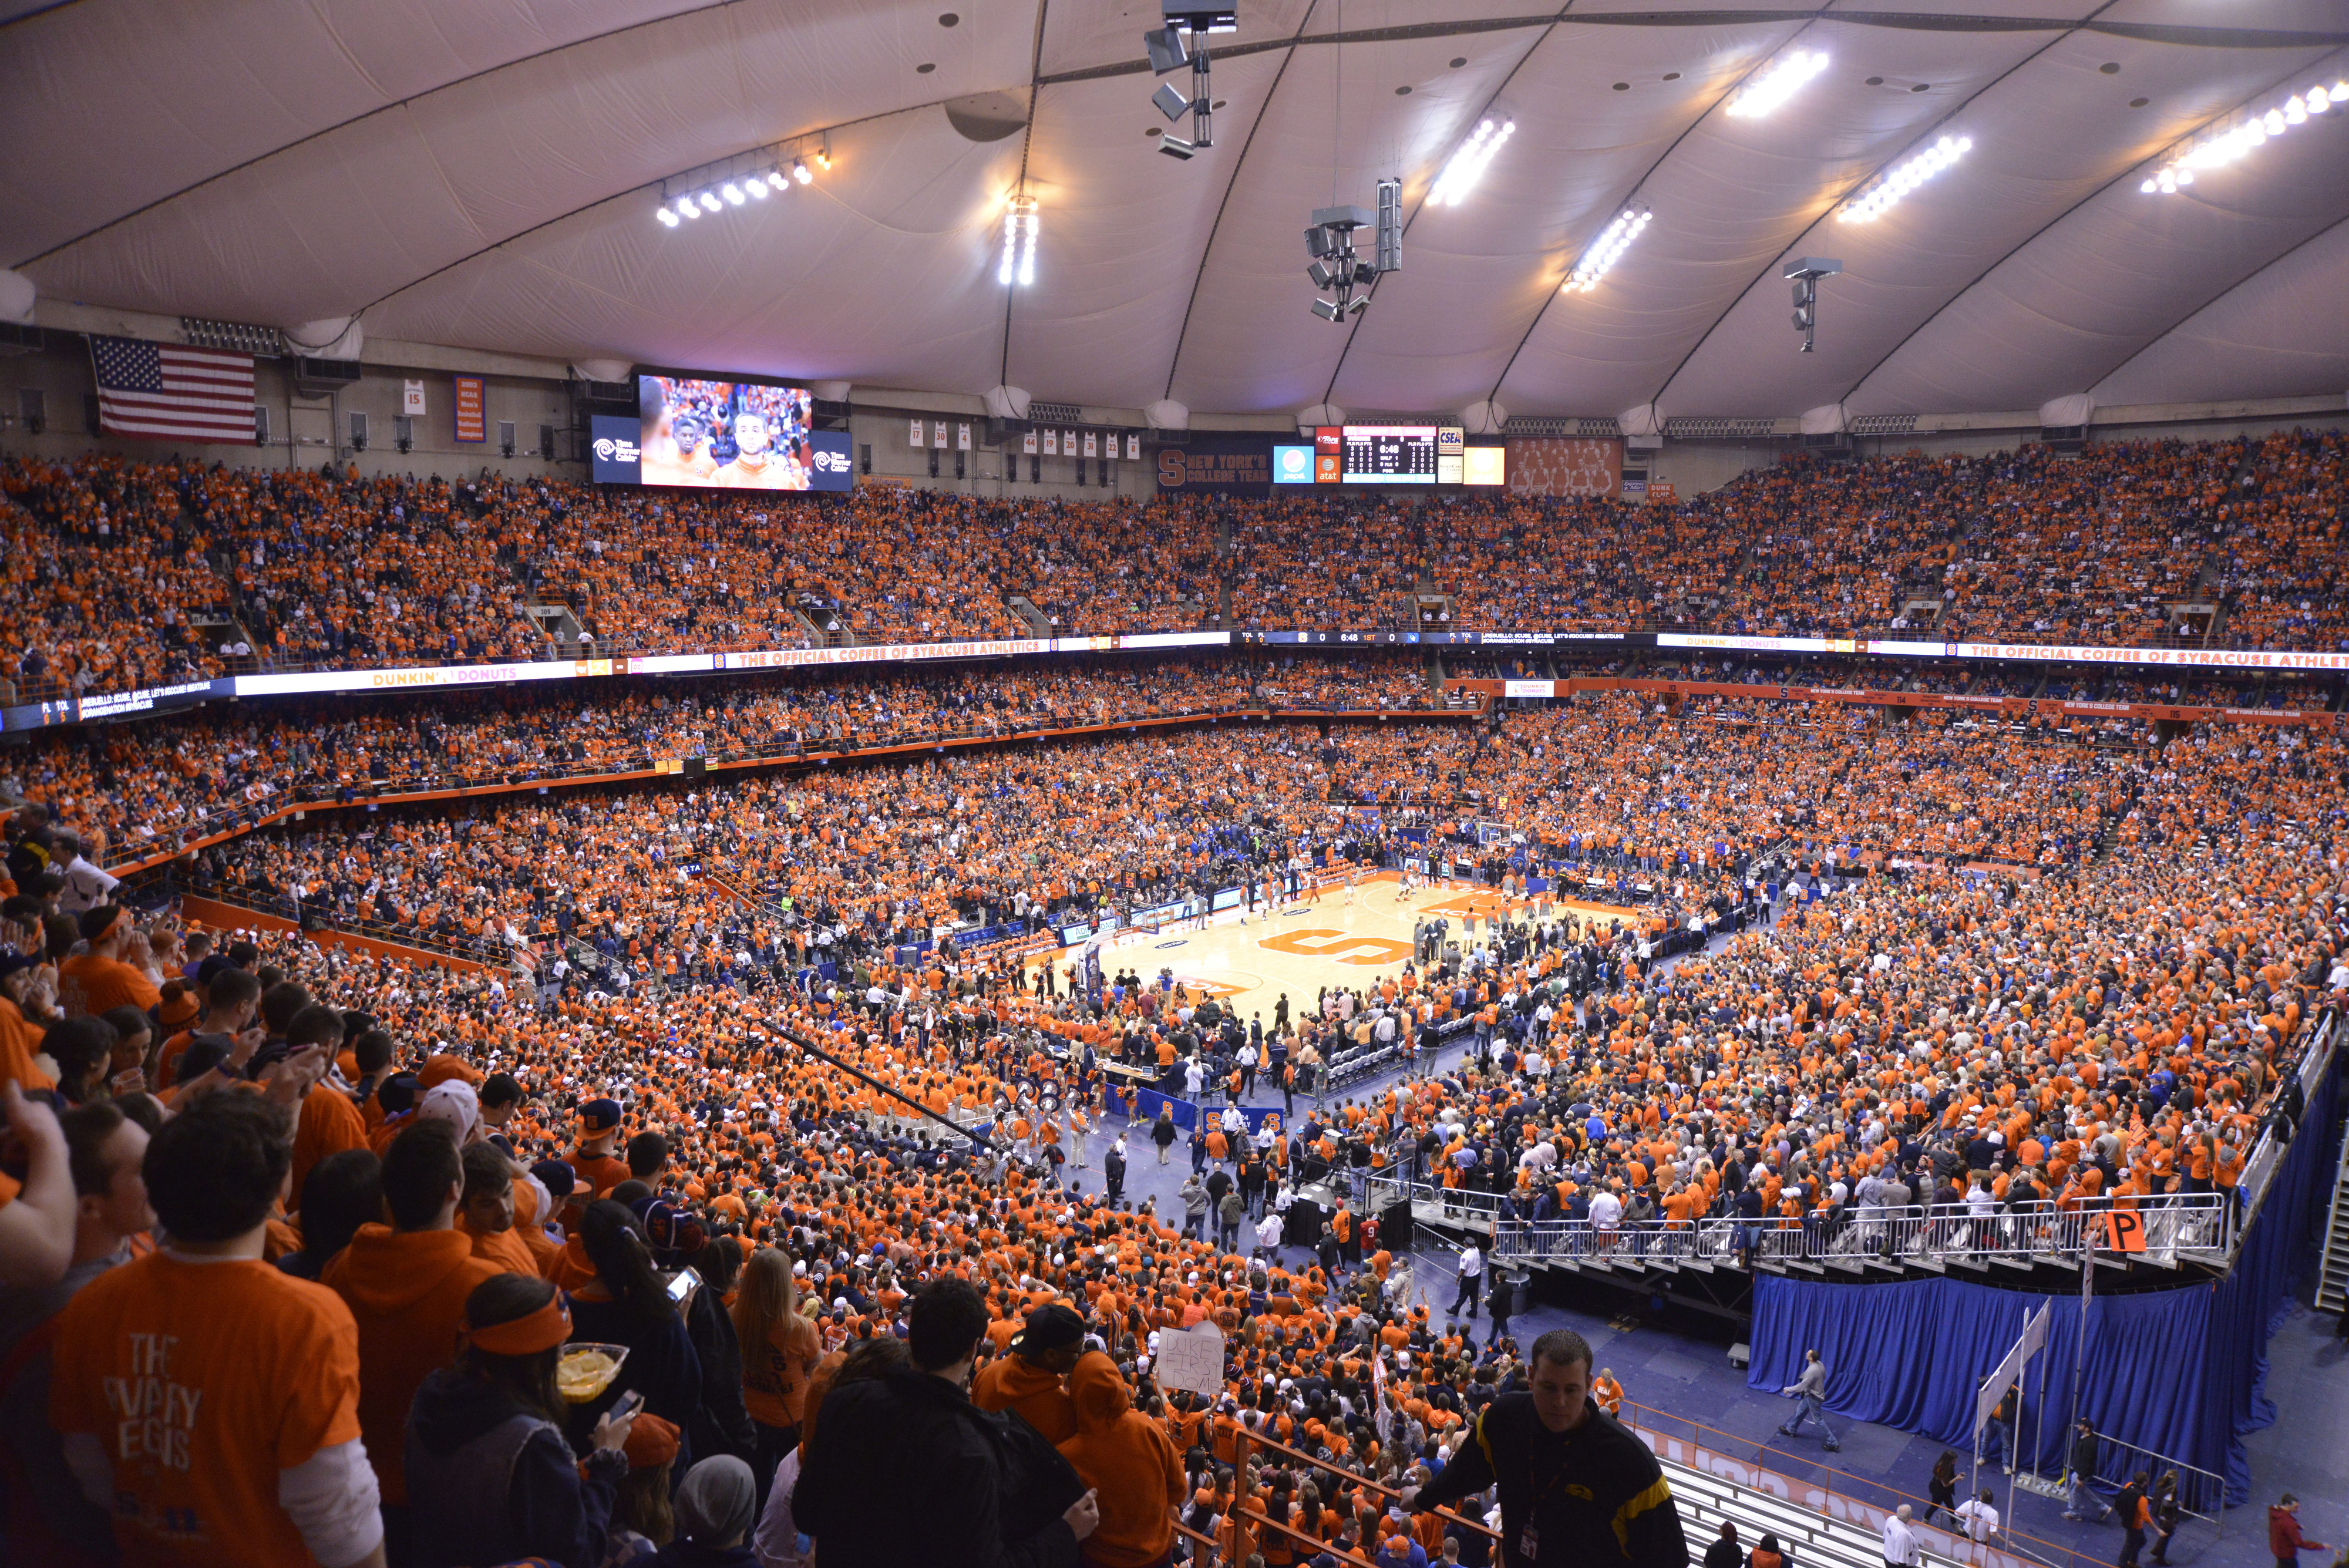 Jackson State wants to build a dome to rival Syracuse's Carrier Dome